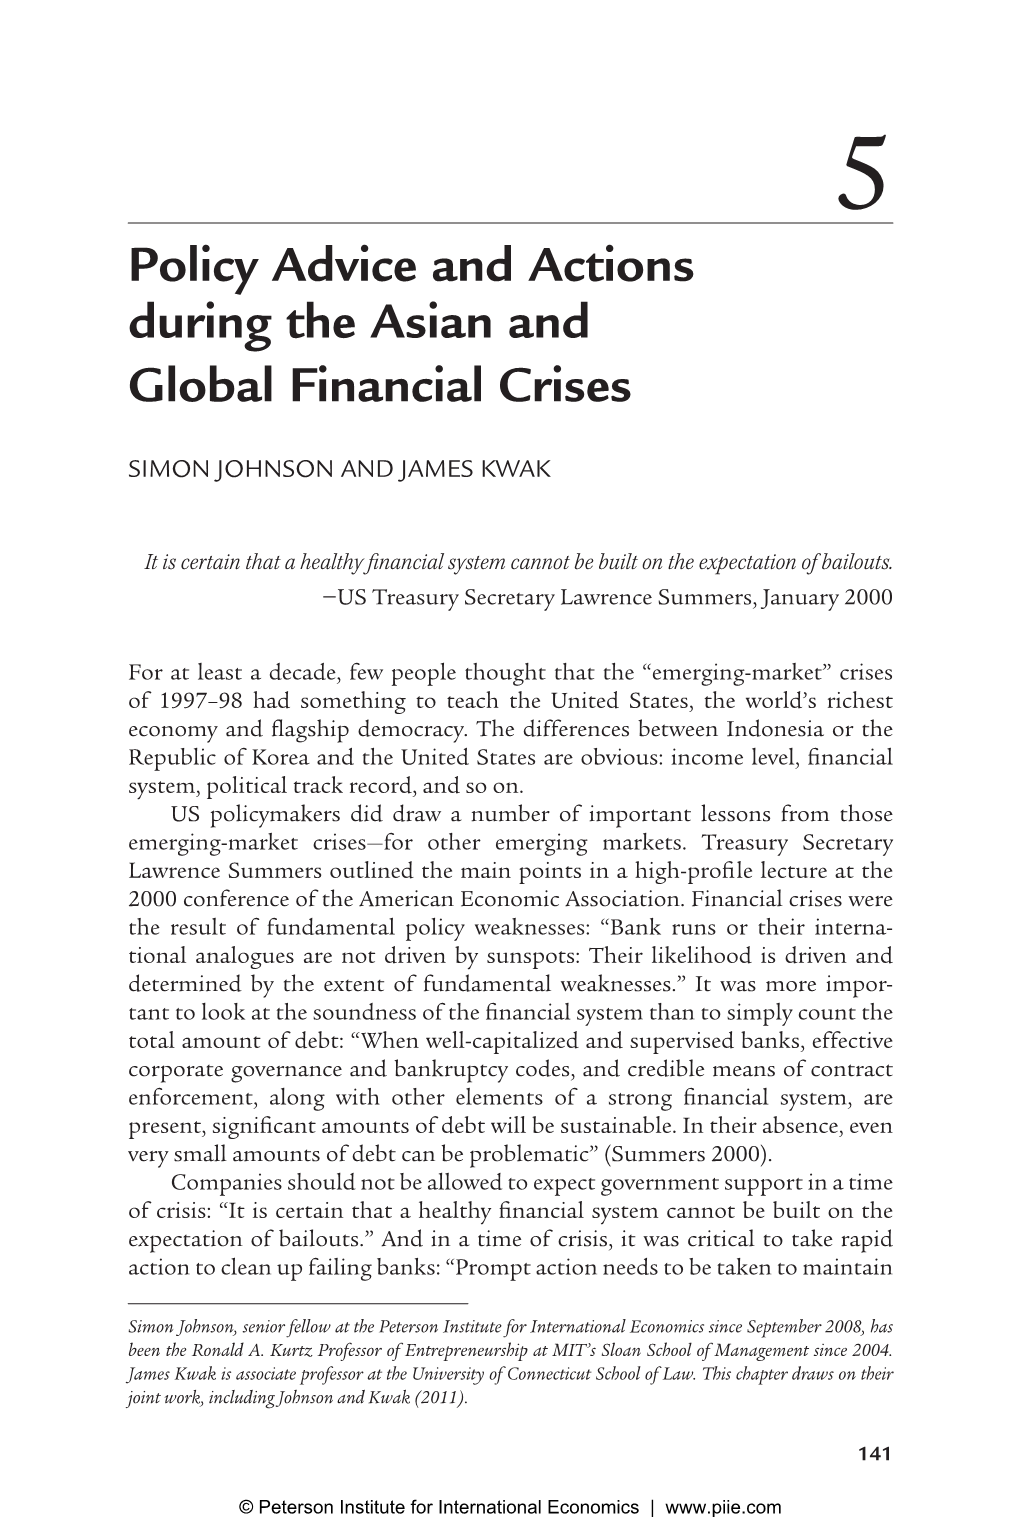 Policy Advice and Actions During the Asian and Global Financial Crises